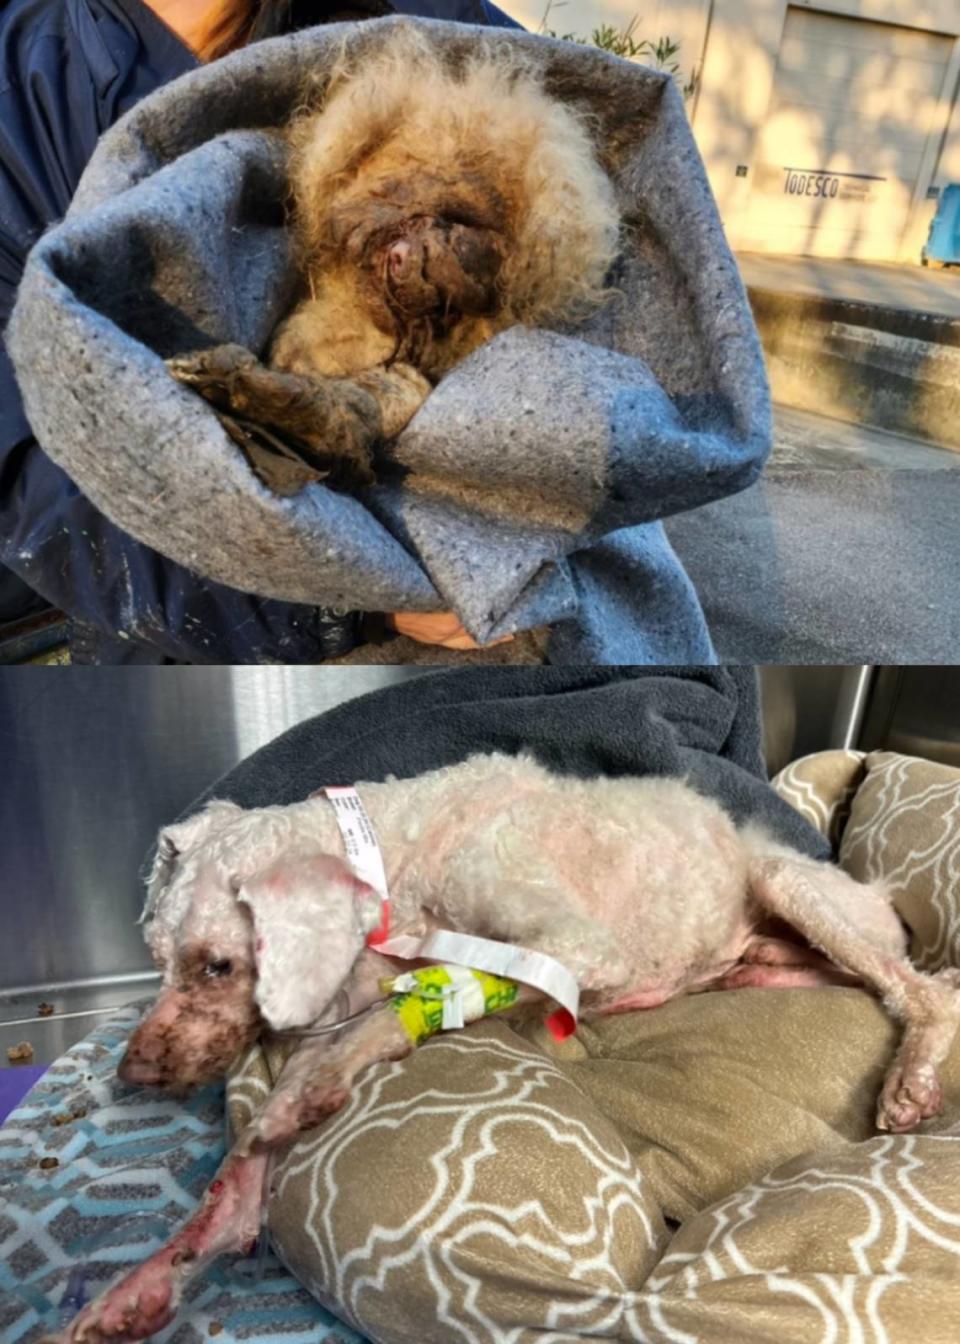 Treasure had two pounds of matted fur cut off his body after being found abandoned in a dumpster in the Burton area of northern Beaufort County. The 10-year-old poodle is still in recovery at the Port Royal Veterinary Hospital.